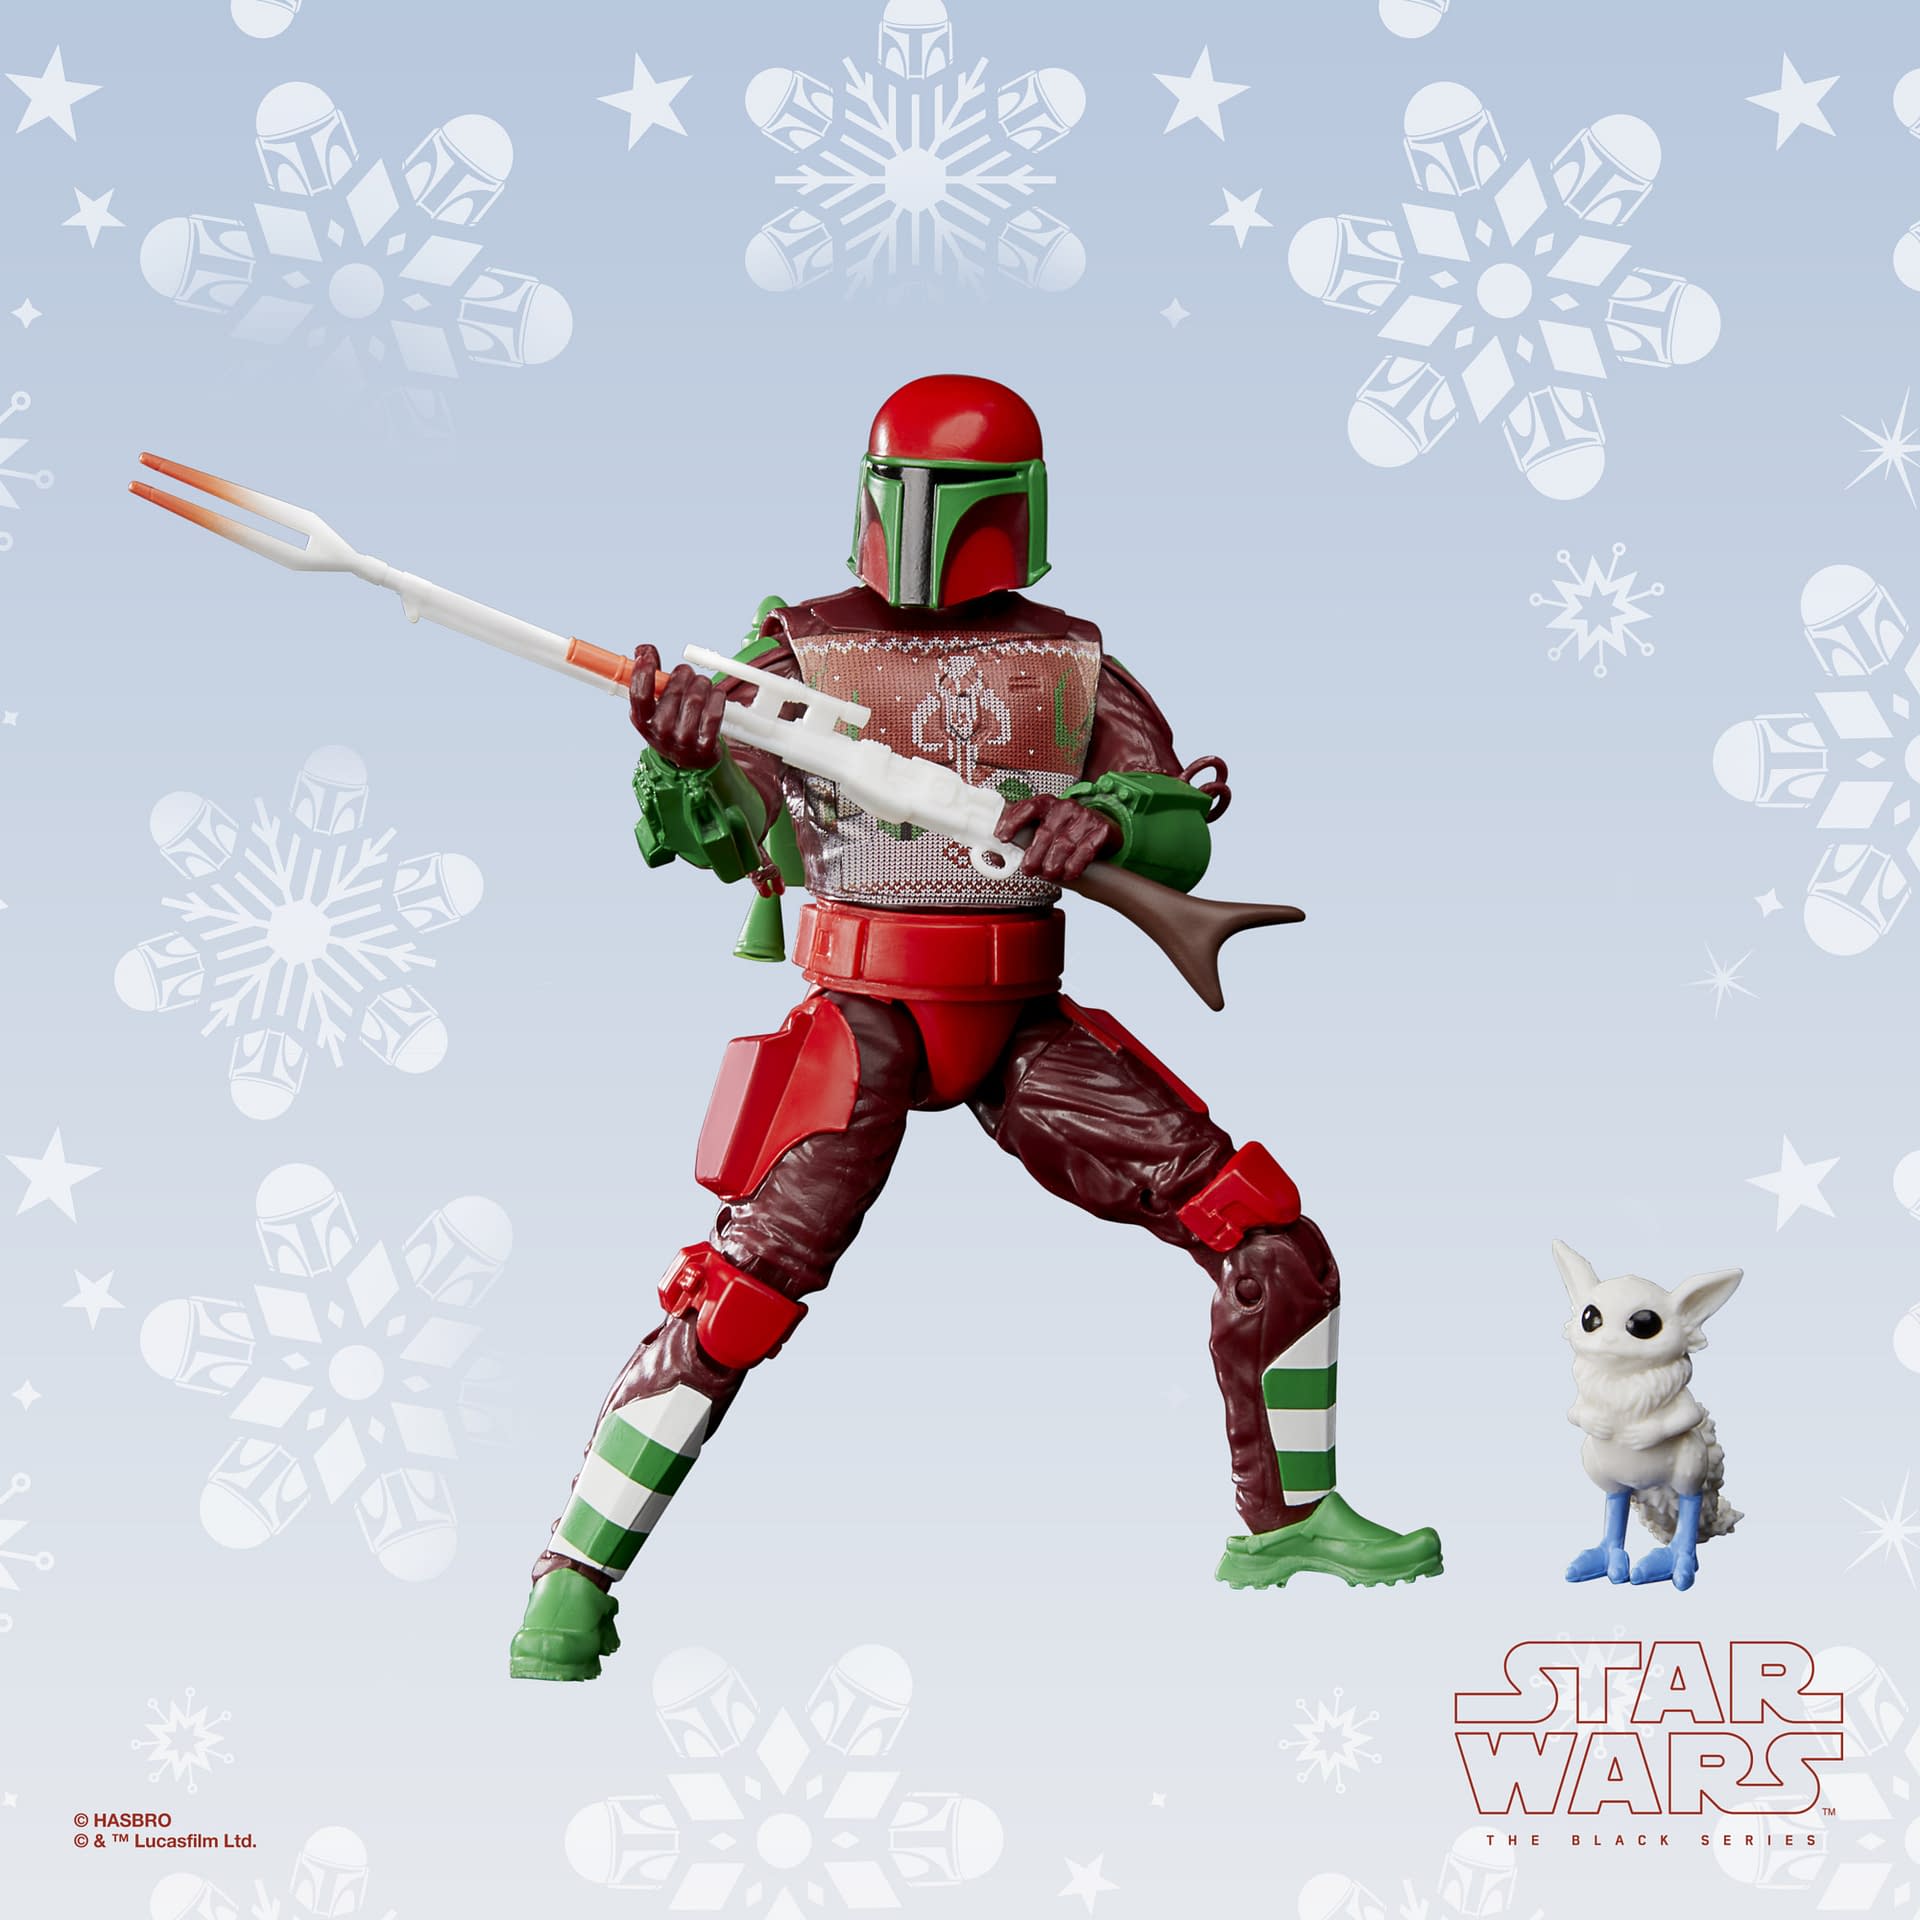 Star Wars Holiday Cheer Hits Mandalore with New Holiday Edition Figure 